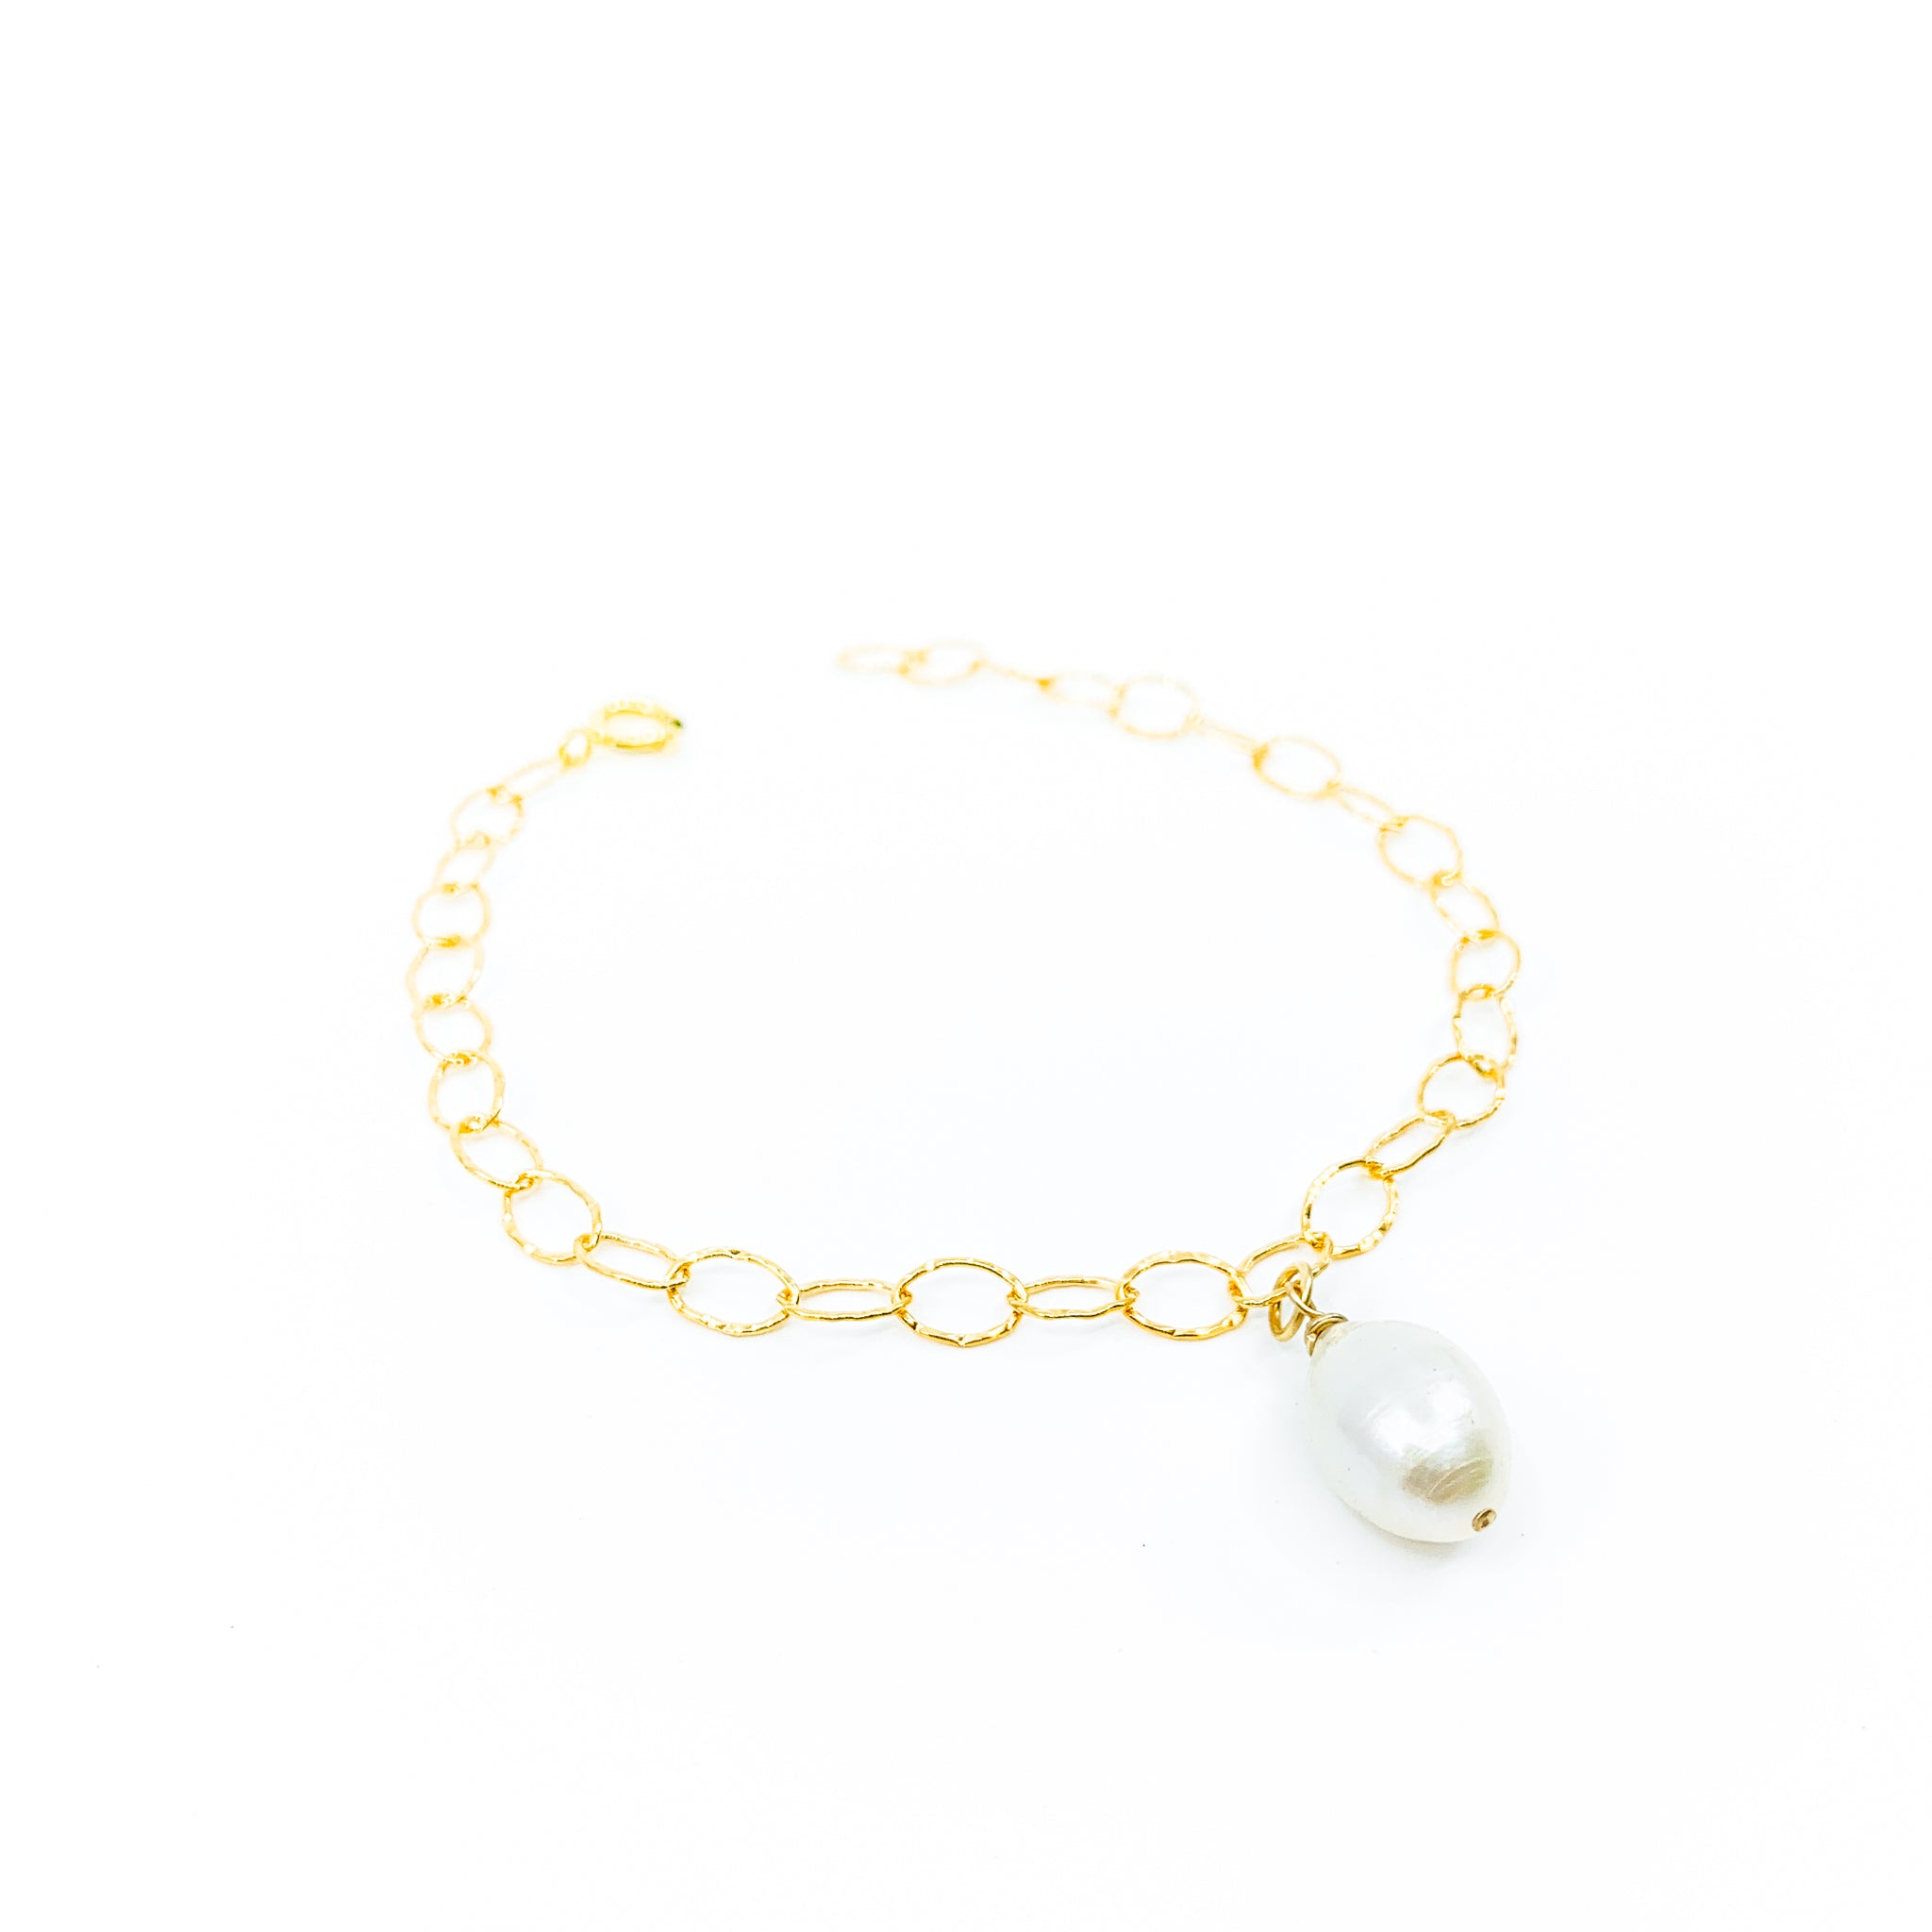 hammered gold chain white pearl charm bracelet by eve black jewelry made in Hawaii